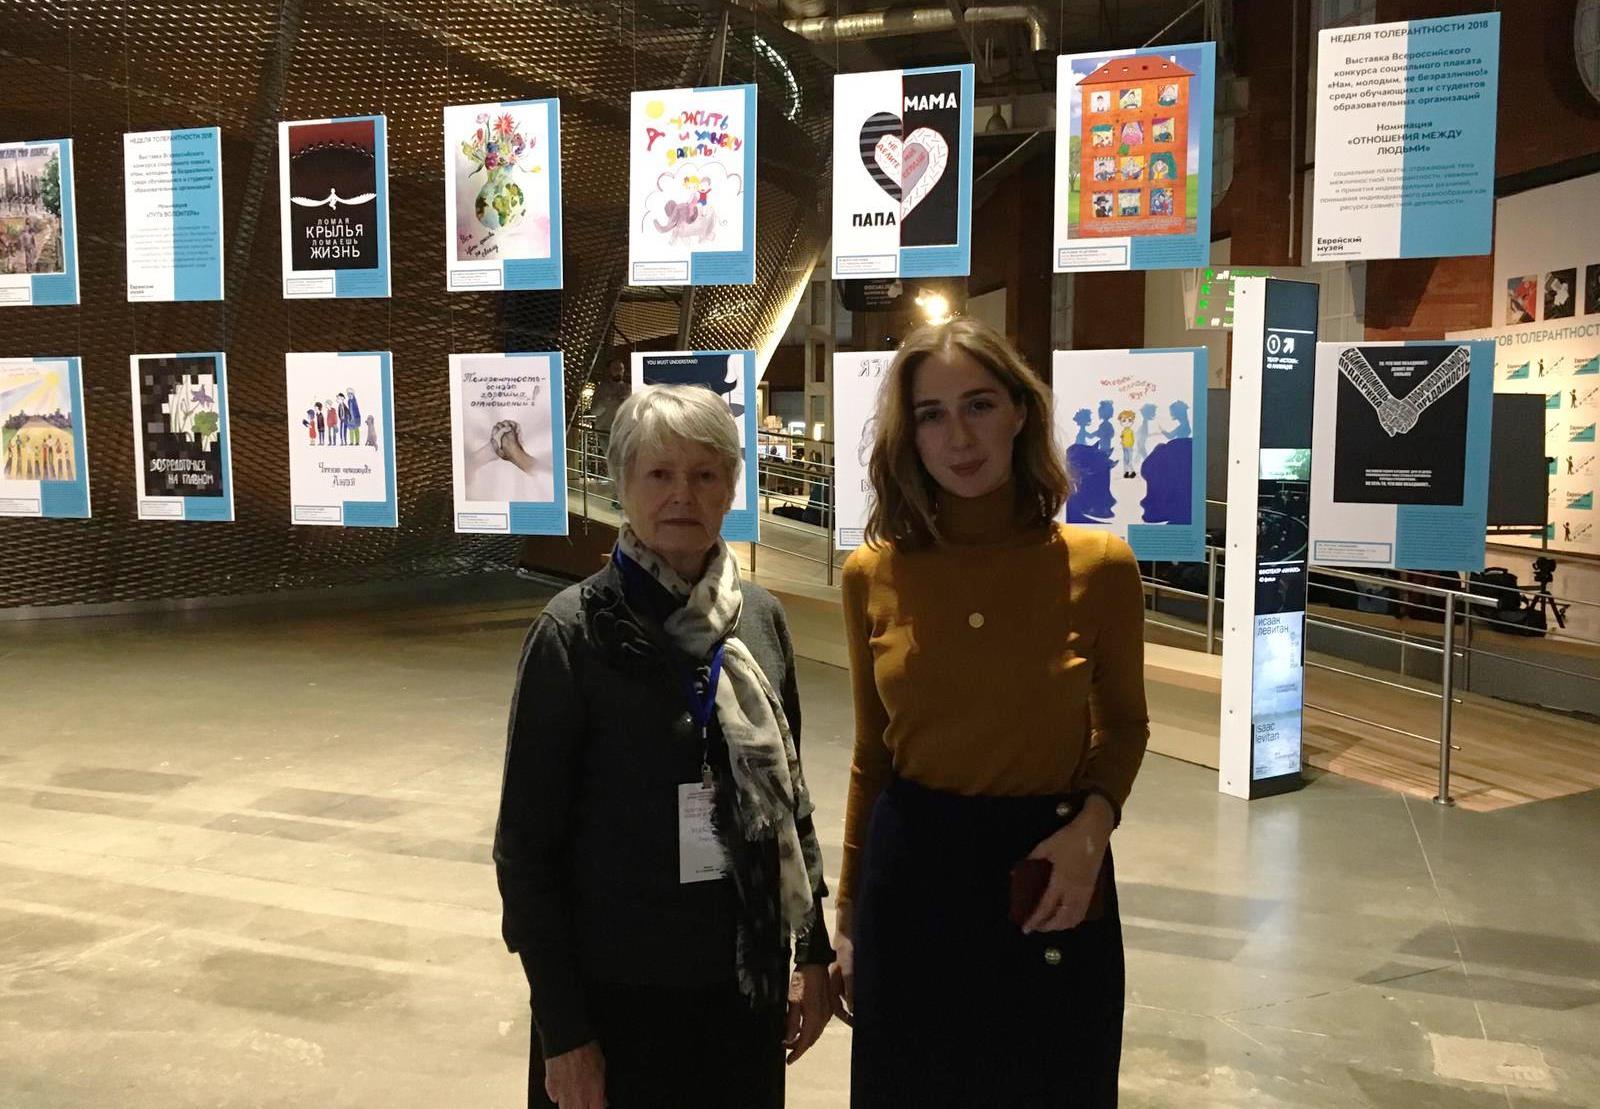 Mme France with Ms Etery Ordzhonikidze at the Tolerance Center